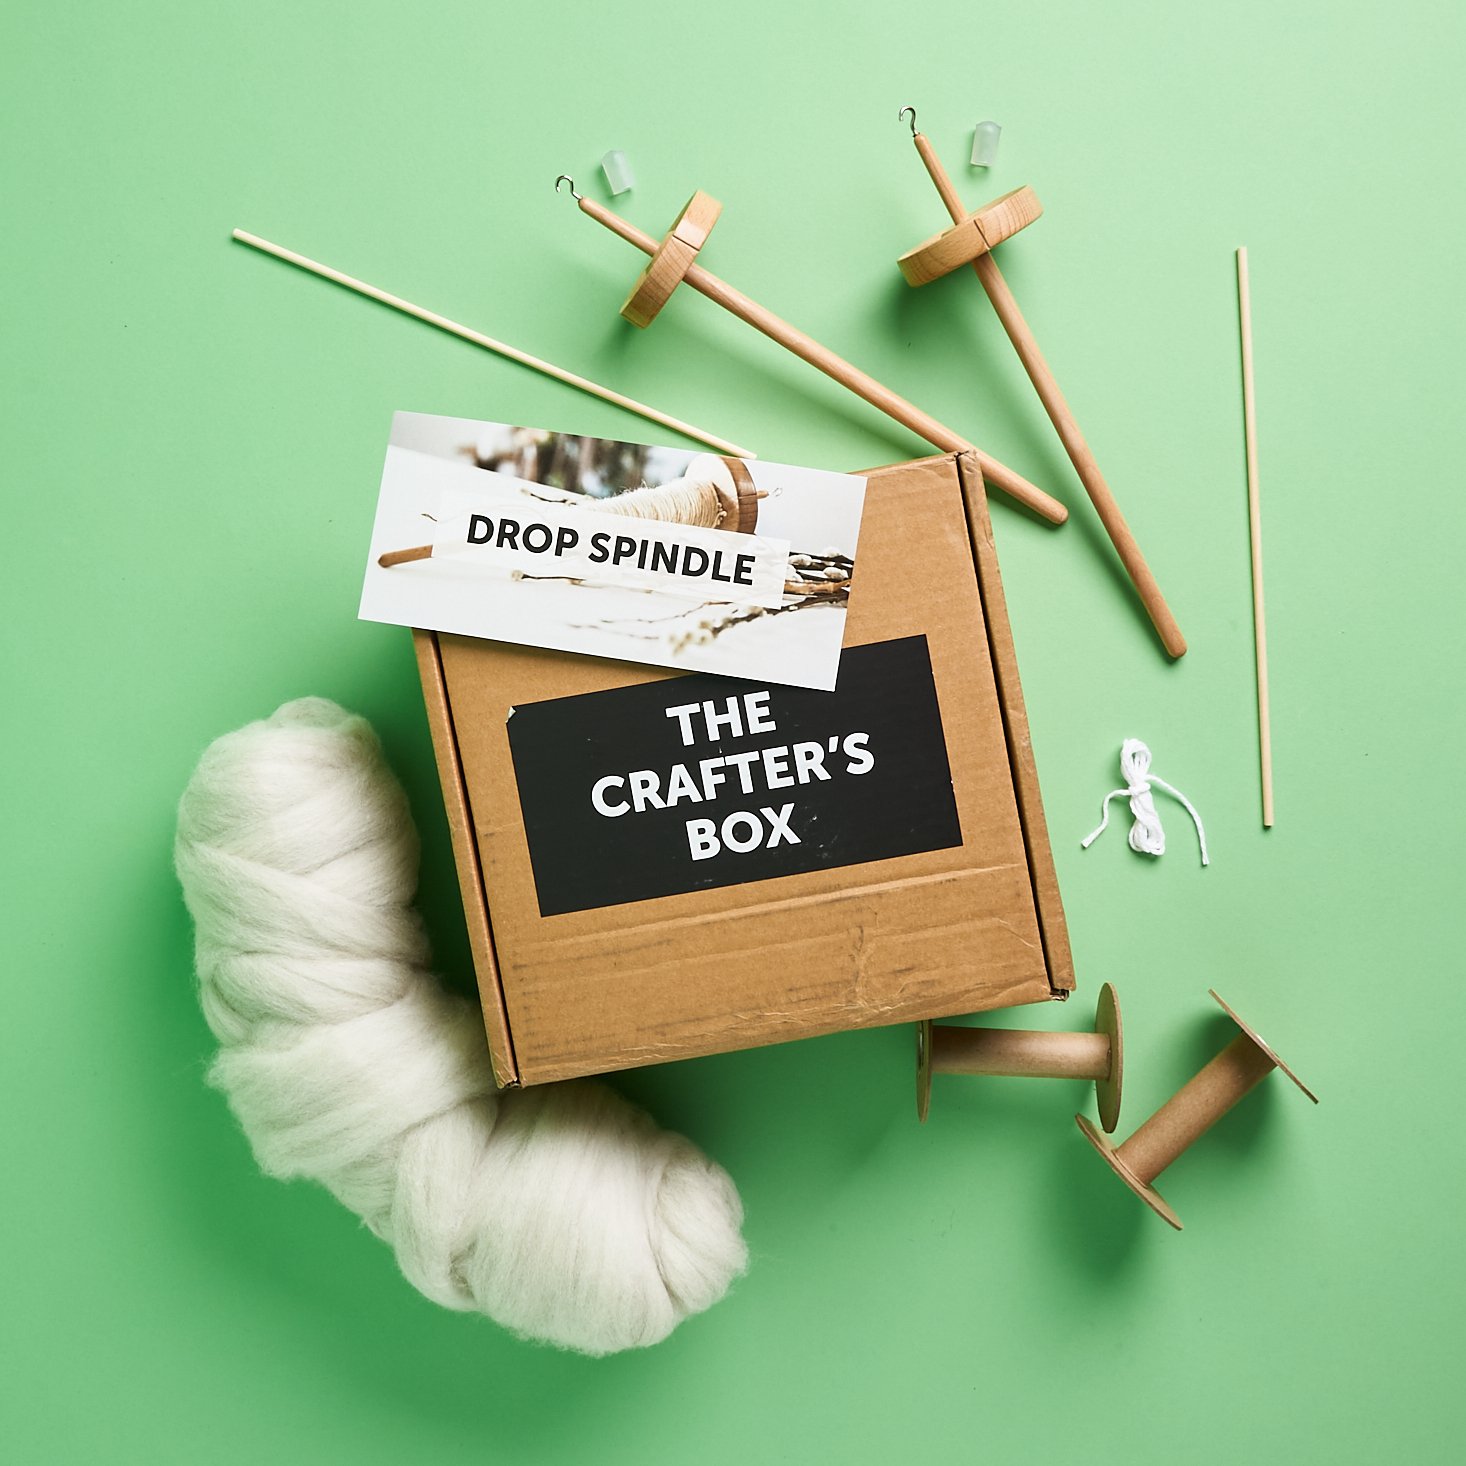 The Crafter’s Box Review – Making Yarn with ‘Drop Spindle’